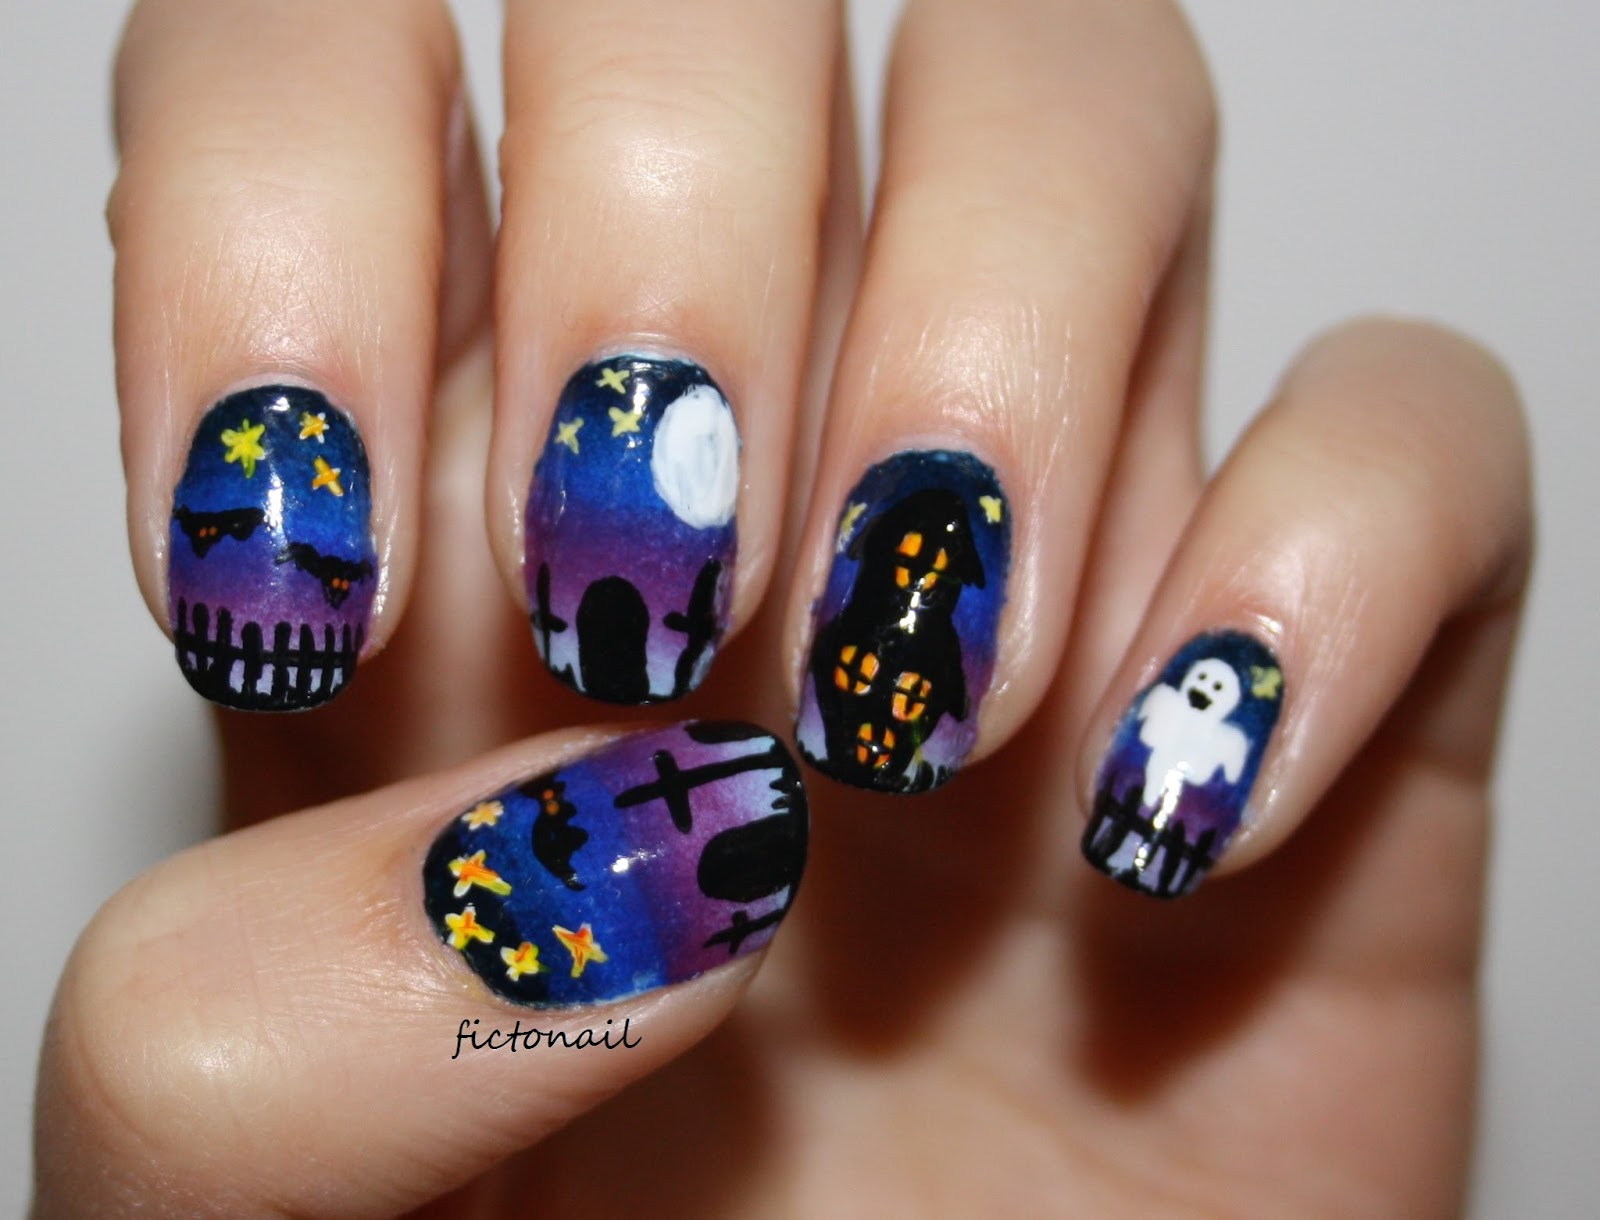 4. Haunted House Nails - wide 8